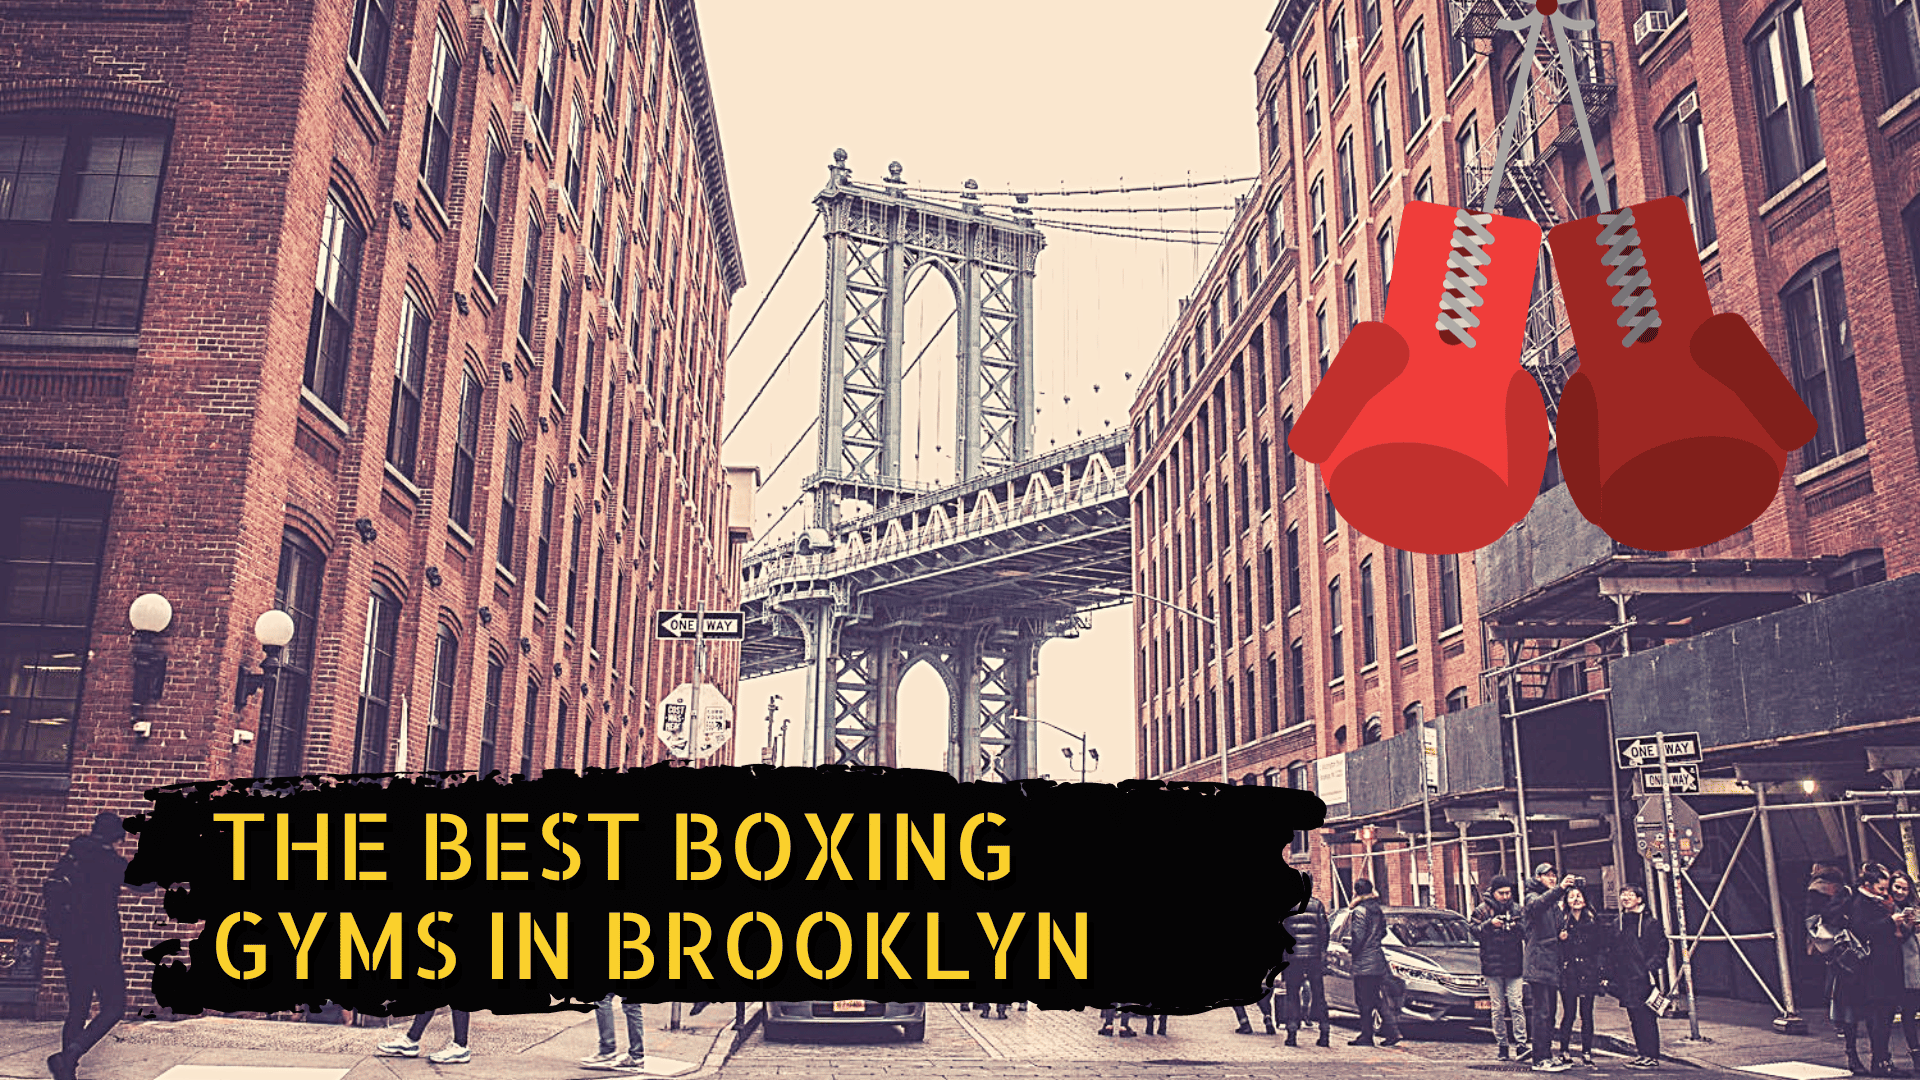 Brooklyn Bridge, some boxing gloves, and the title the best boxing gyms in Brooklyn